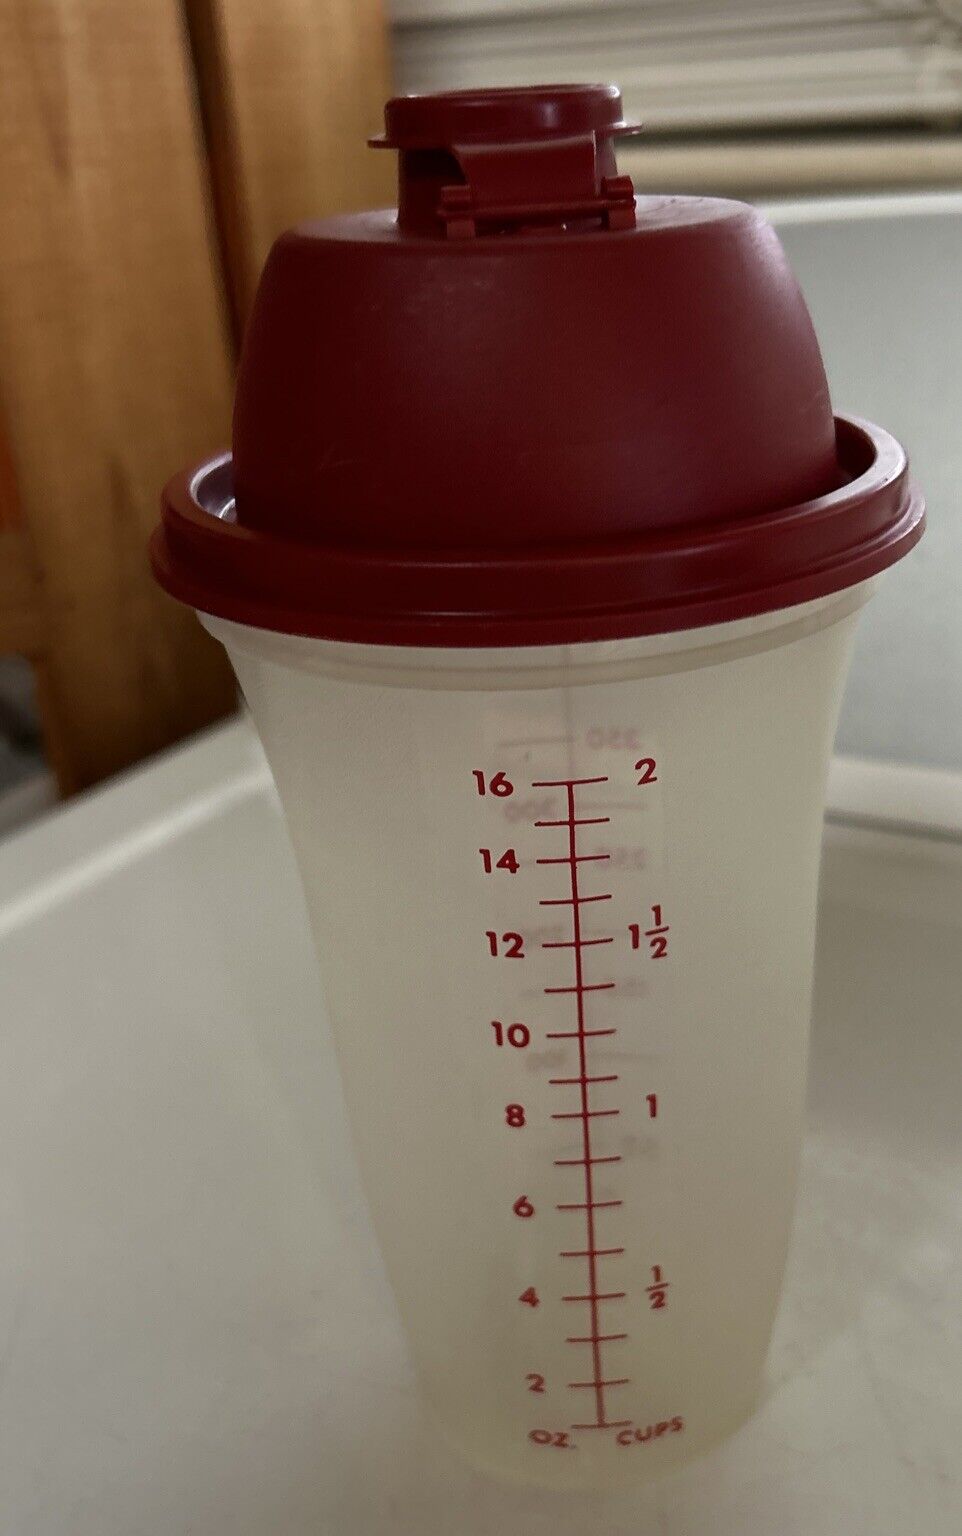 Vintage Tupperware 16 OZ. QUICK SHAKE CONTAINER  # 844 With Lid Red Blender